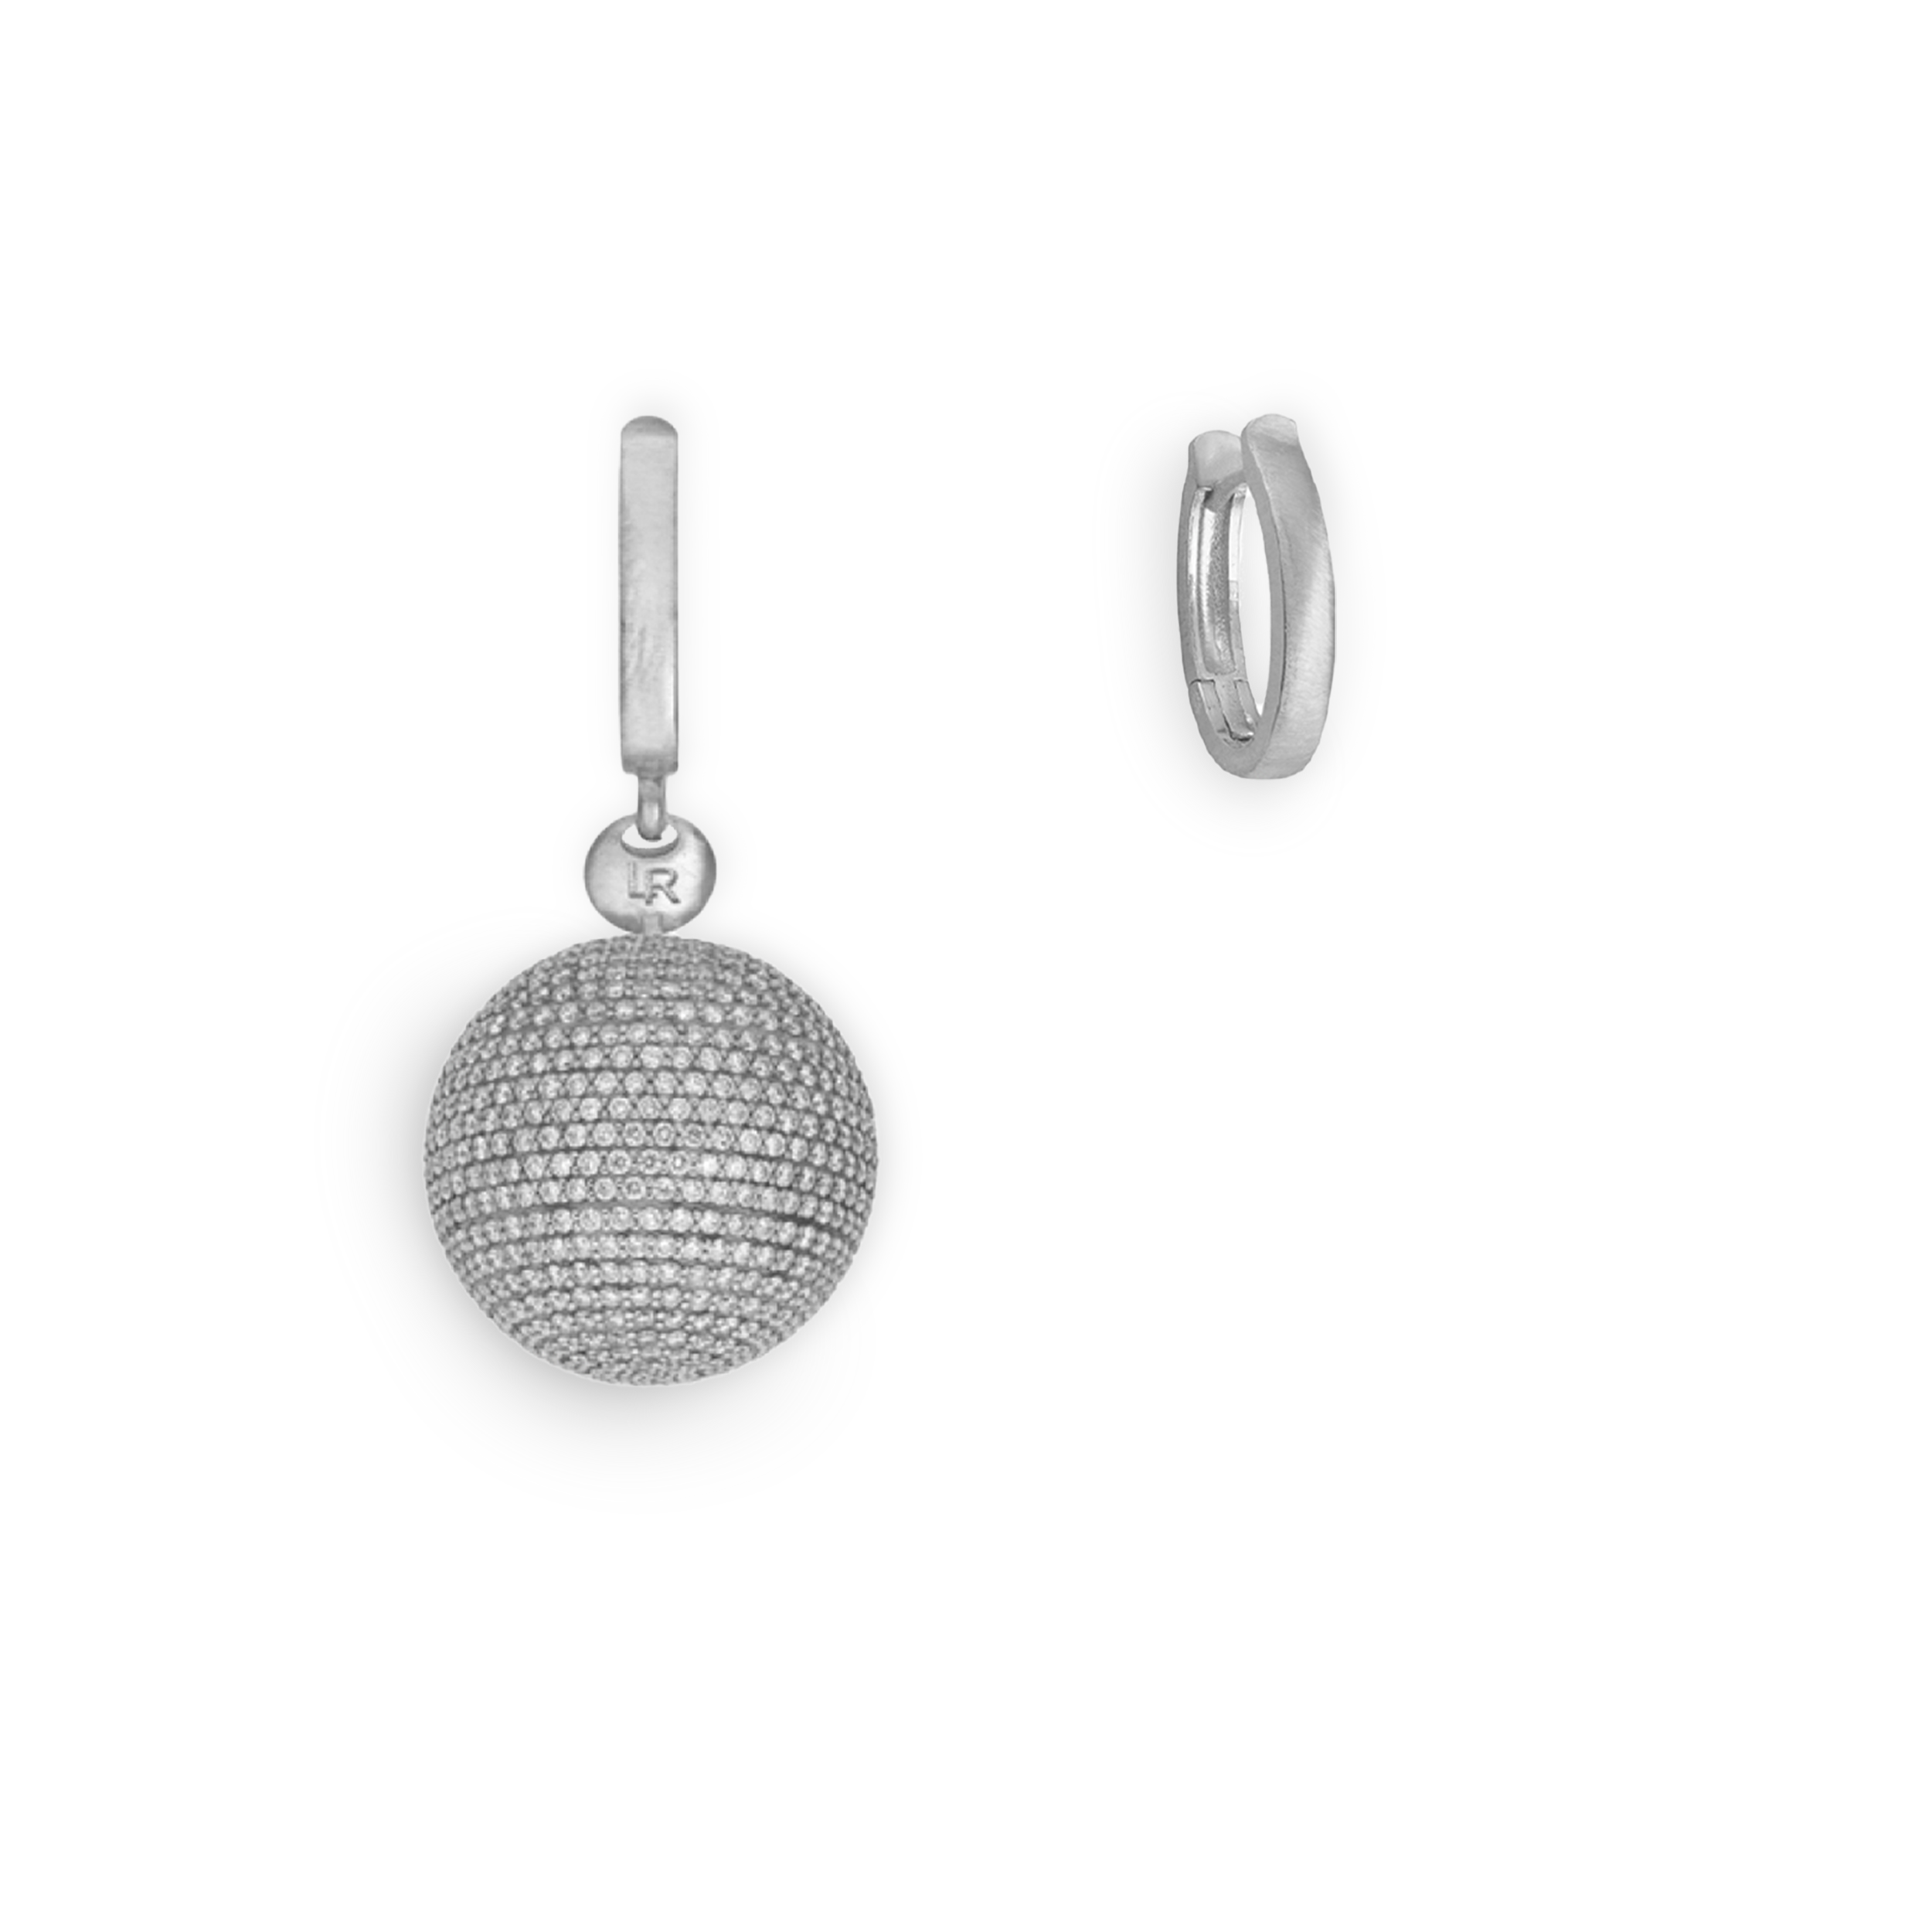 Marella Set of Earrings in Brushed White Gold, one Sphere covered in White Diamonds and one Oval Hoop